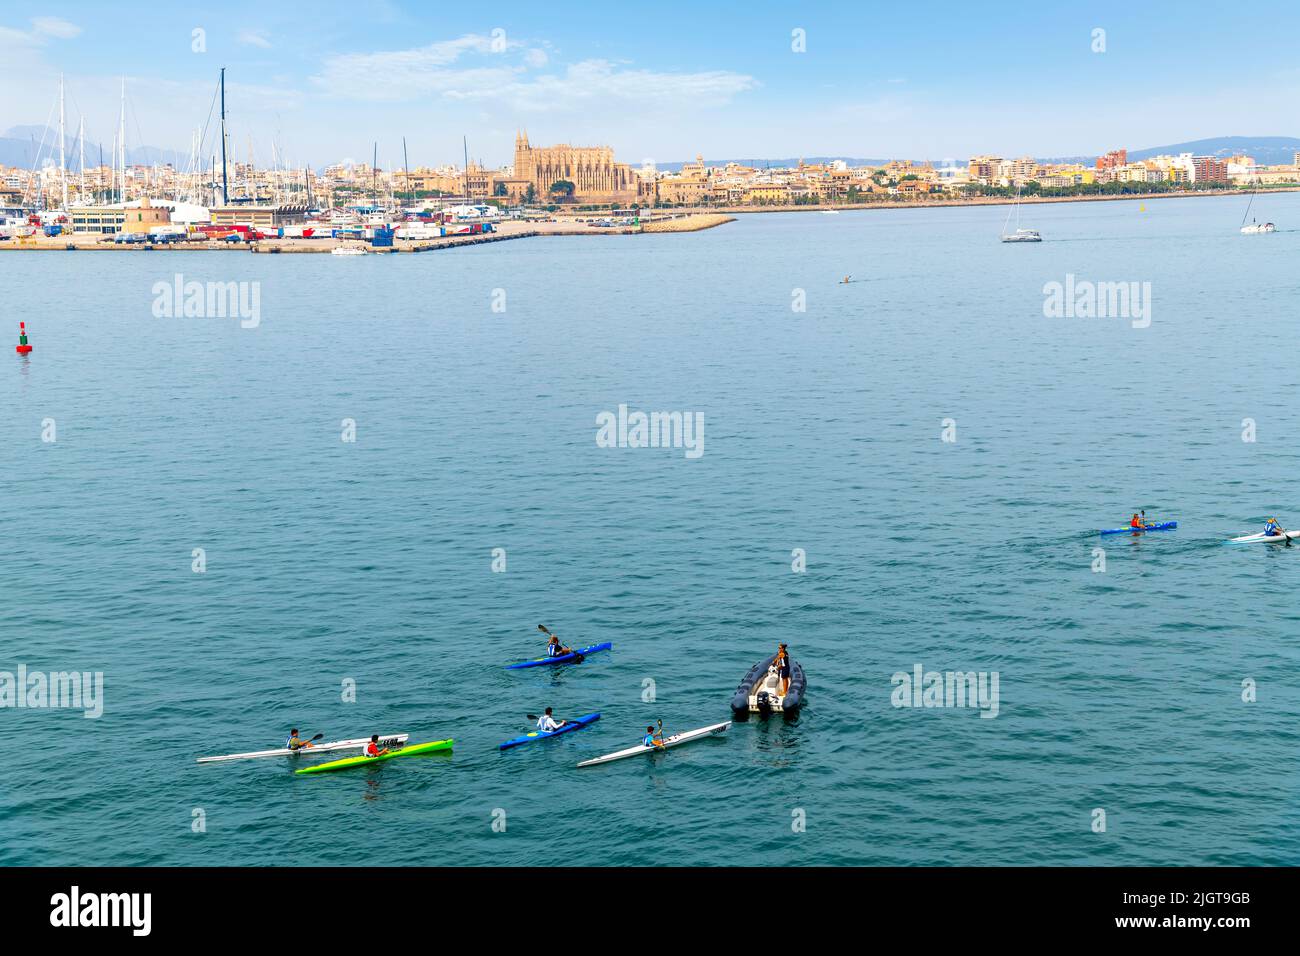 A group of kayers and a small boat in the Mediterranean Sea with the city of Palma de Mallorca, Spain in view on the island of Mallorca. Stock Photo